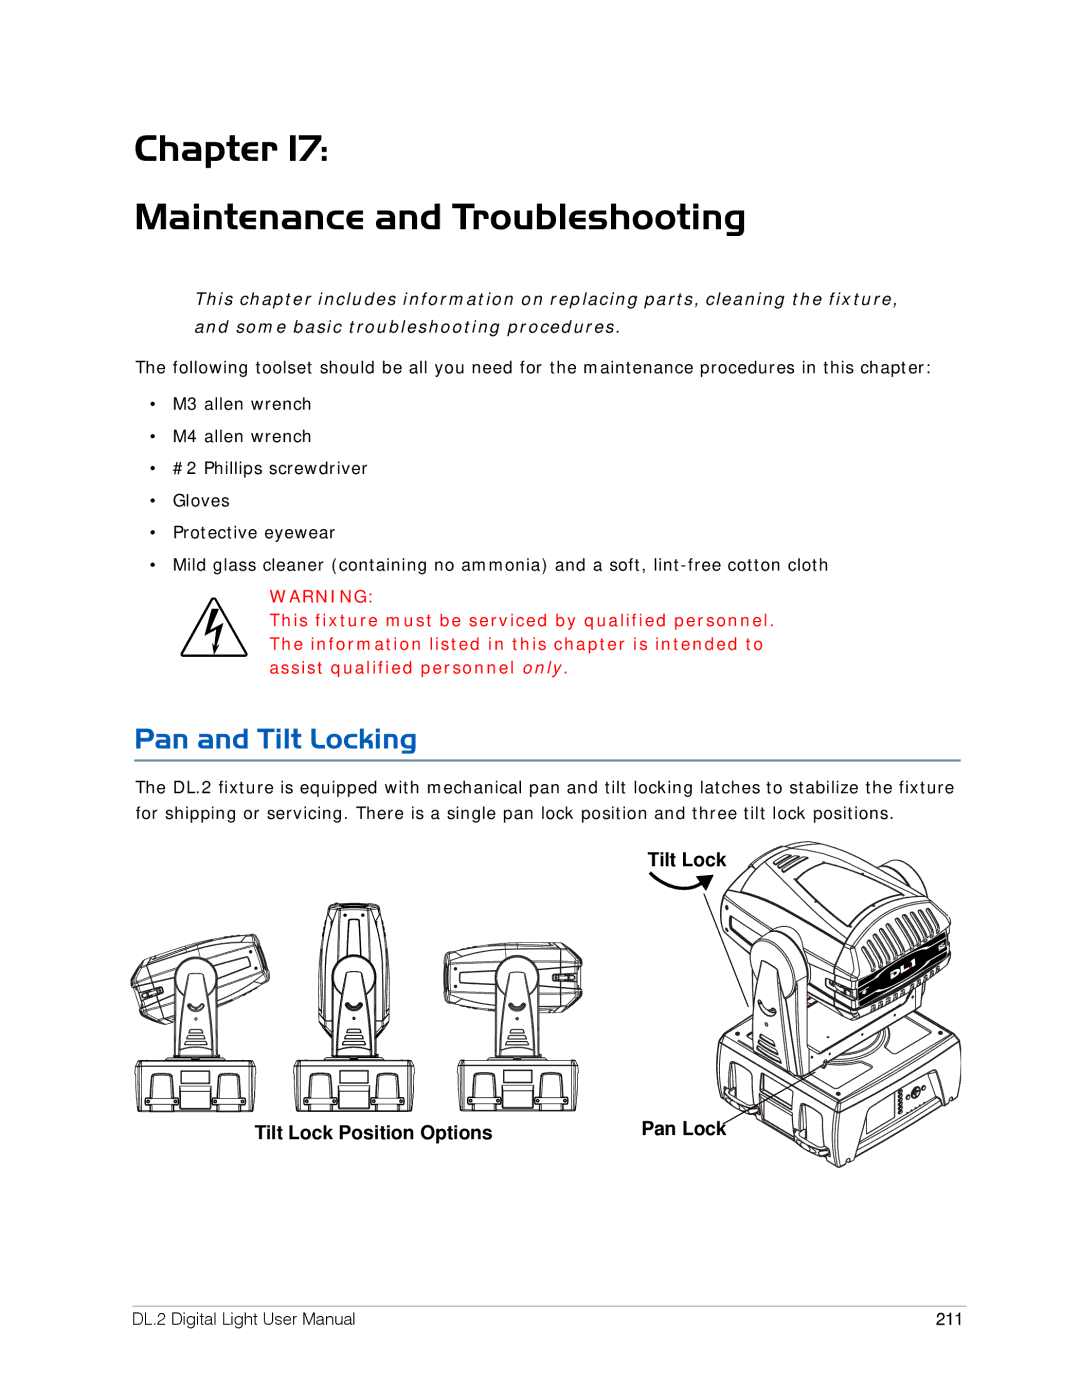 High End Systems DL.2 user manual Chapter Maintenance and Troubleshooting, Pan and Tilt Locking, 211 